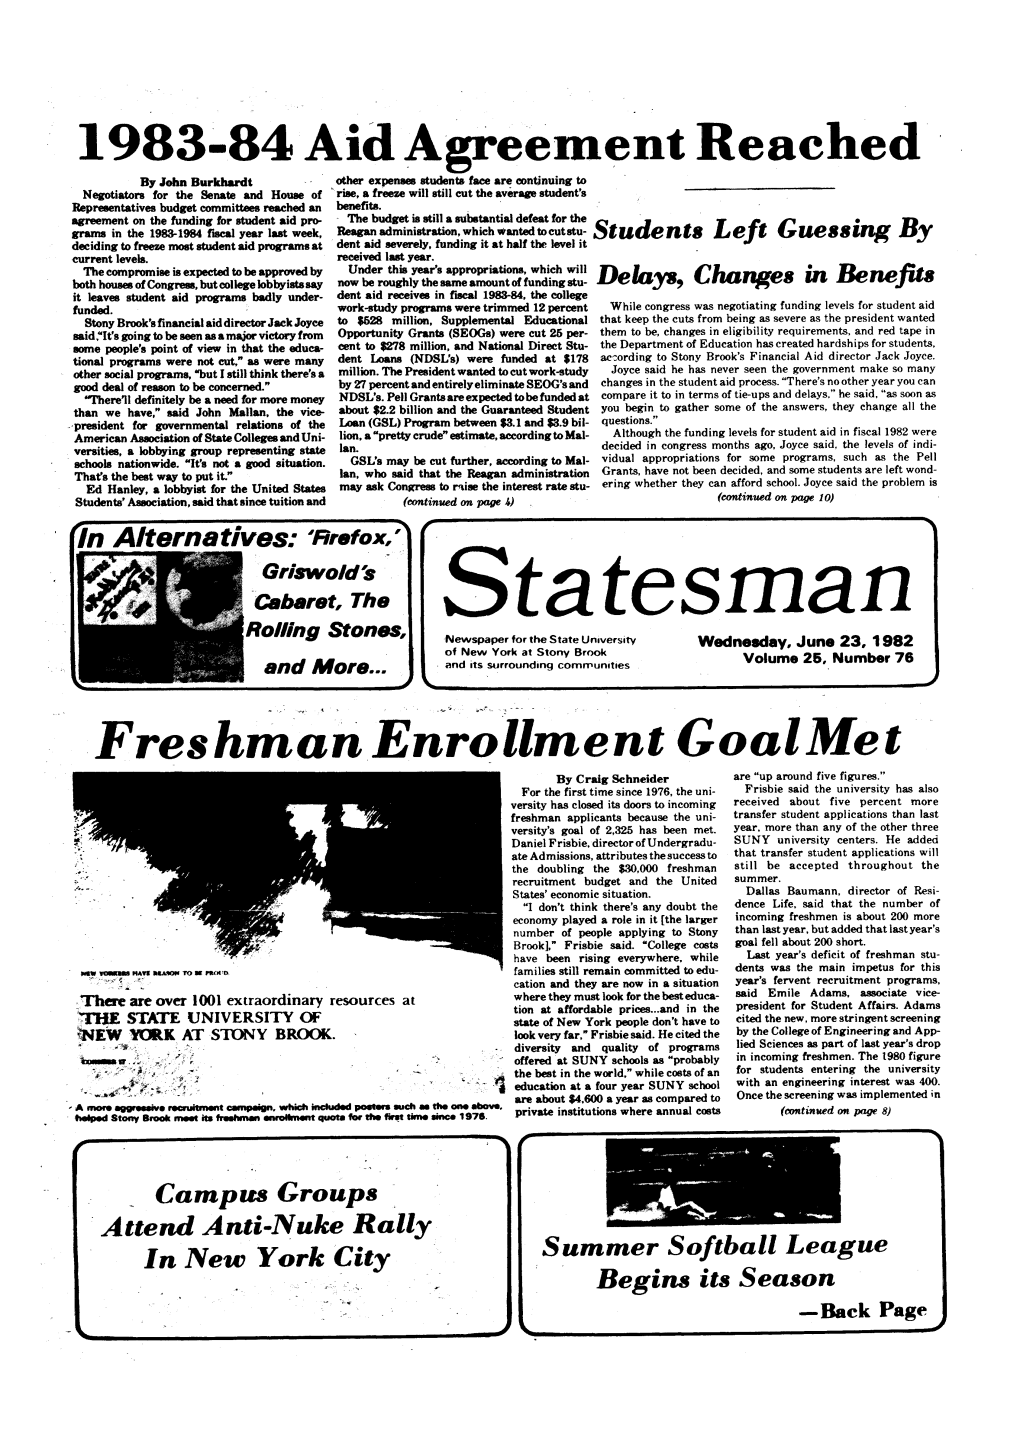 Statesman Rolling Stones, Newspaper for the State University Wednesday, June 23, 1 982 of New York at Stony Brook Volume 26, Number 76 and More